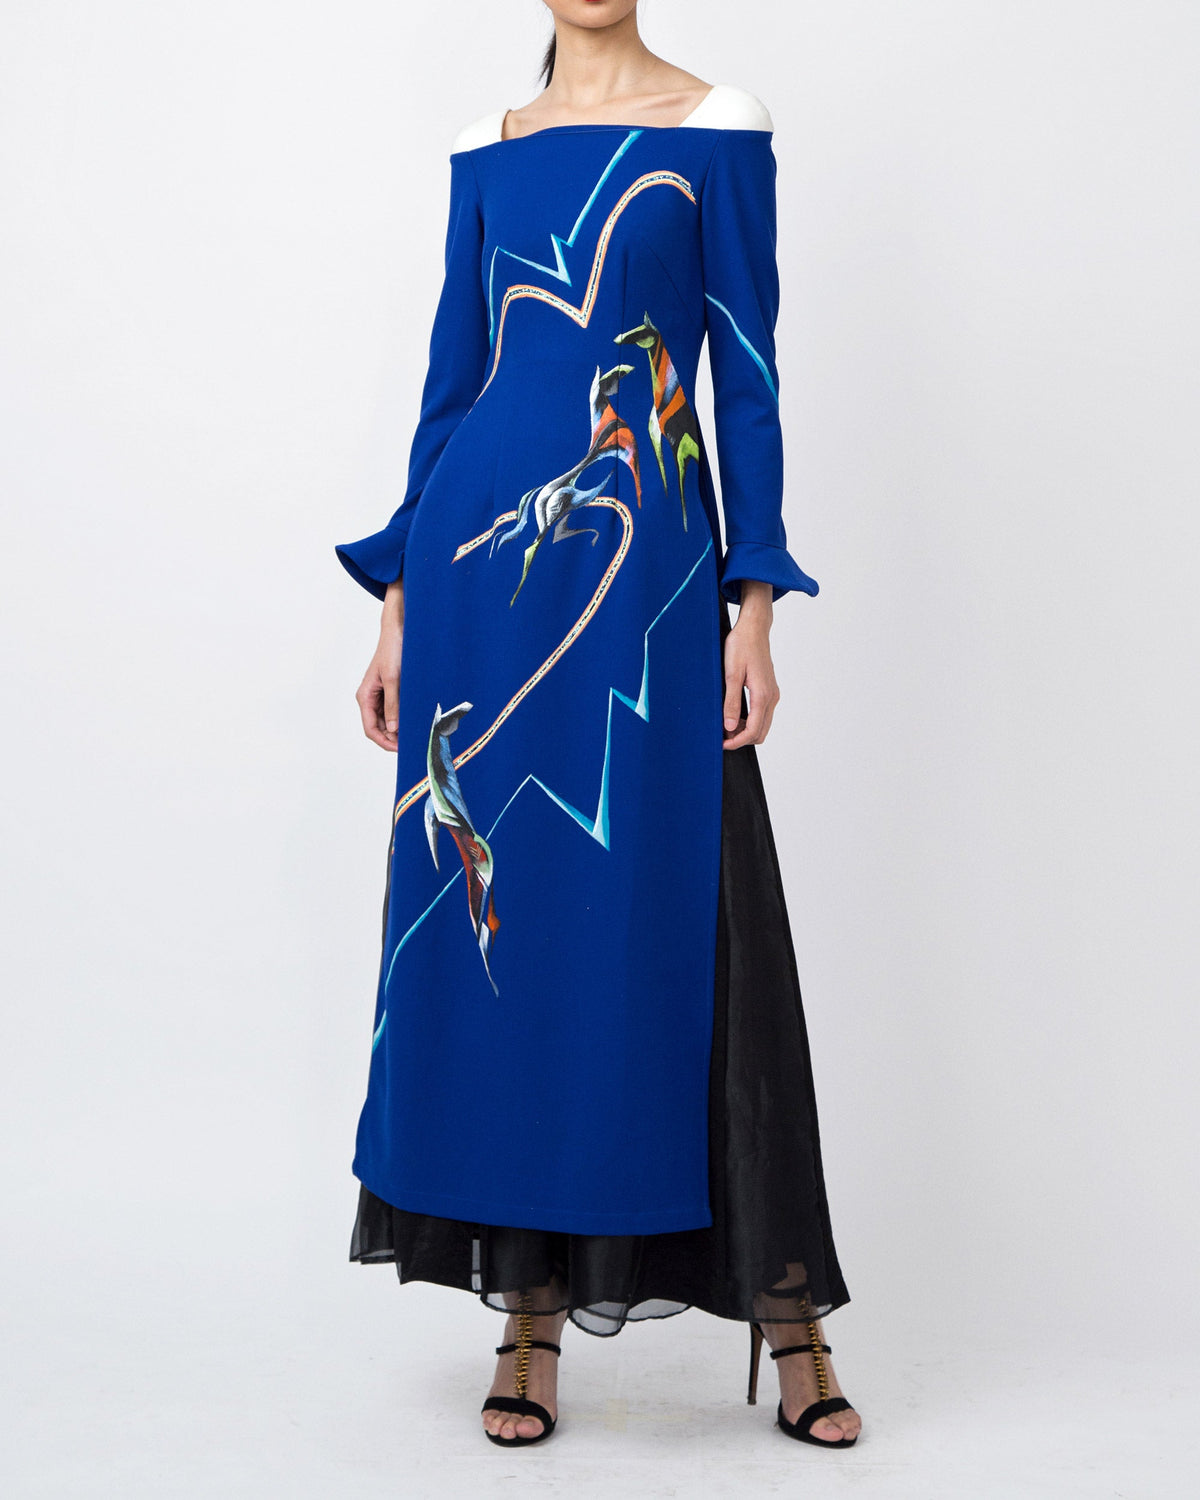 Tinyink-LN20-cobalt-blue-hand-painted-abstract-contemporary-aodai